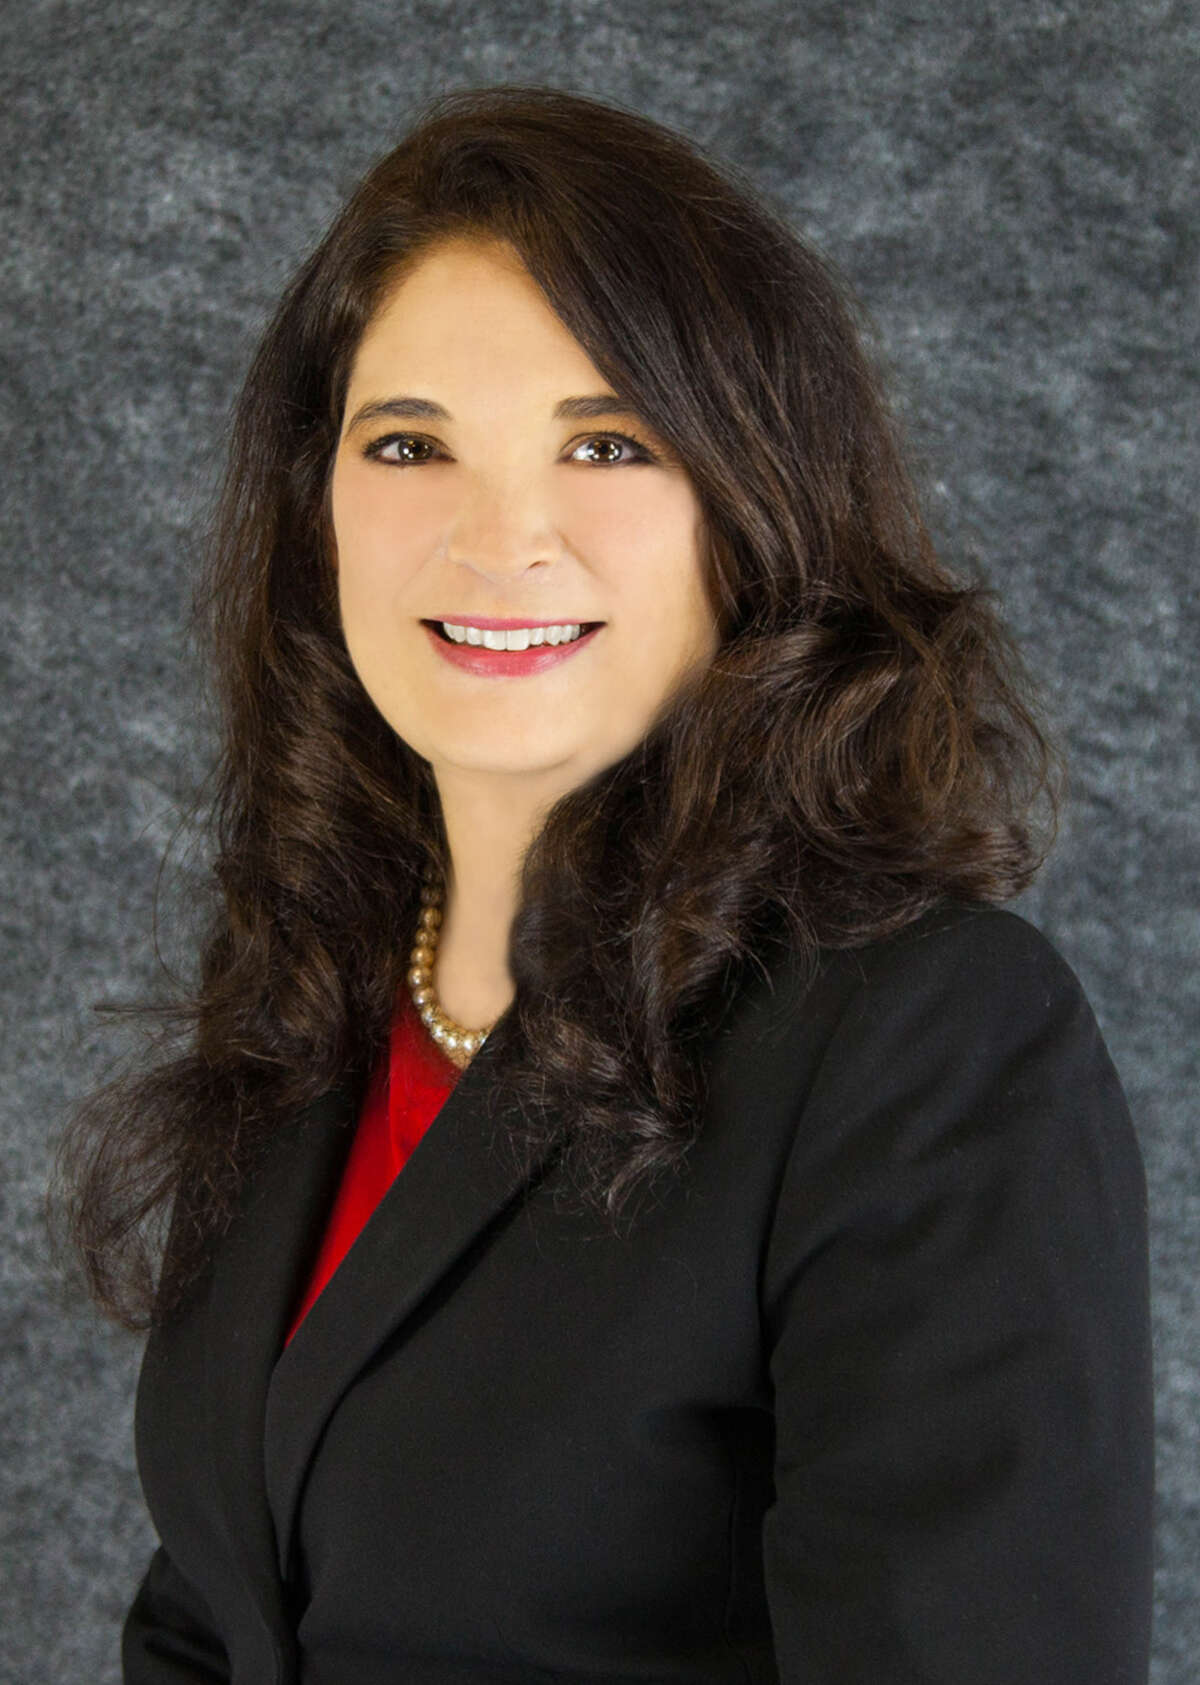 Cadence Bank announced the promotion of Alicia Guerrero to assistant vice president and trust & estates officer in the Williams Tower office.